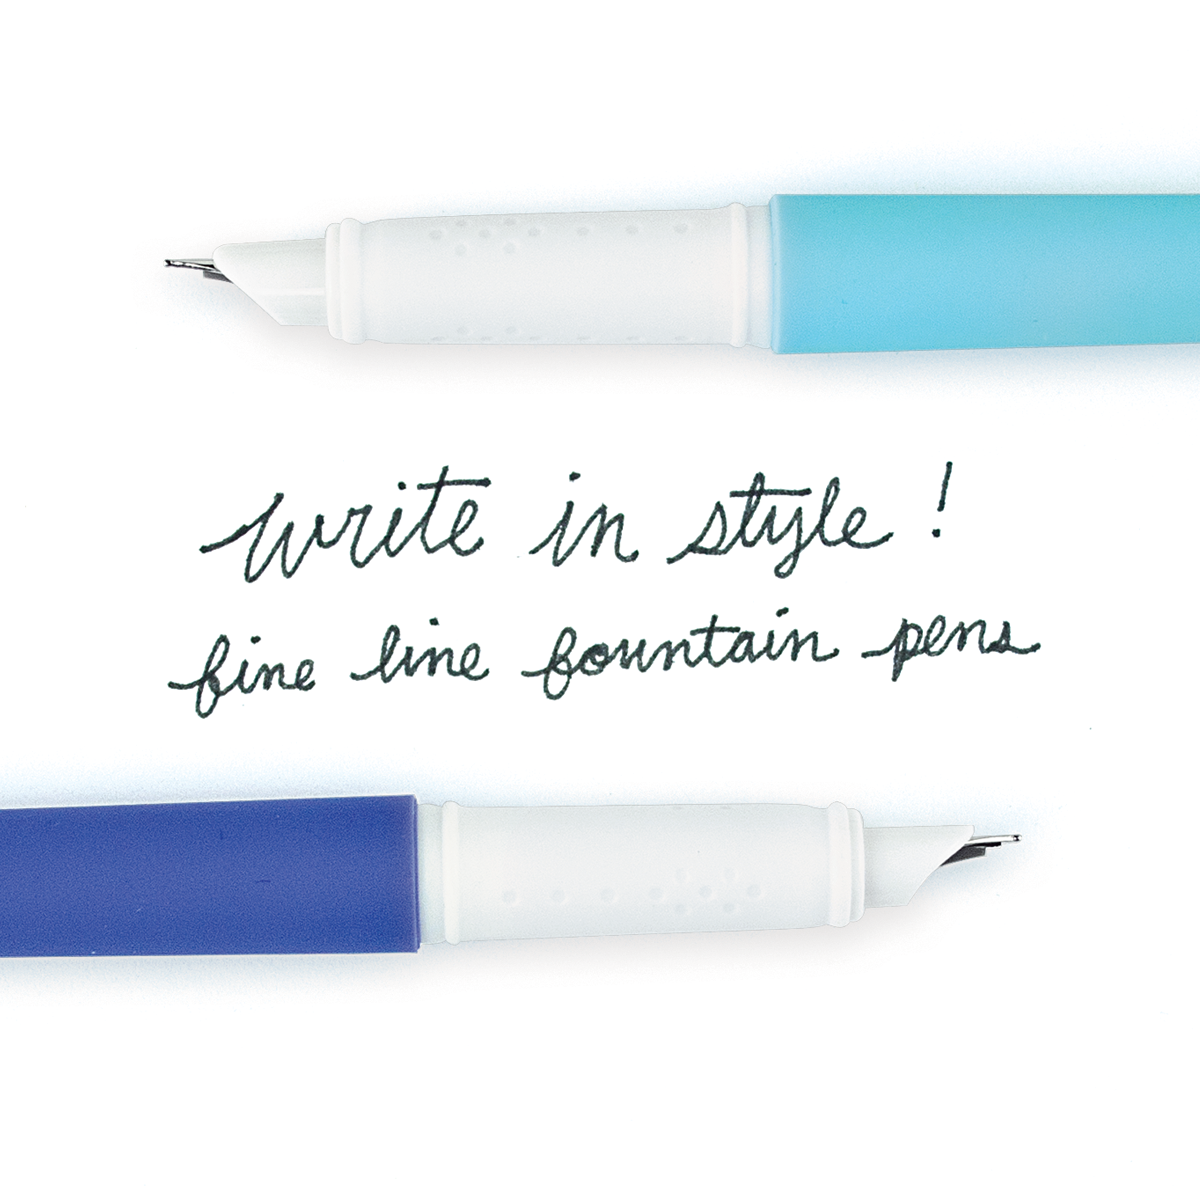 Light blue and dark blue fab fountain pens with "write in style! fine line fountain pens" written between them in black ink